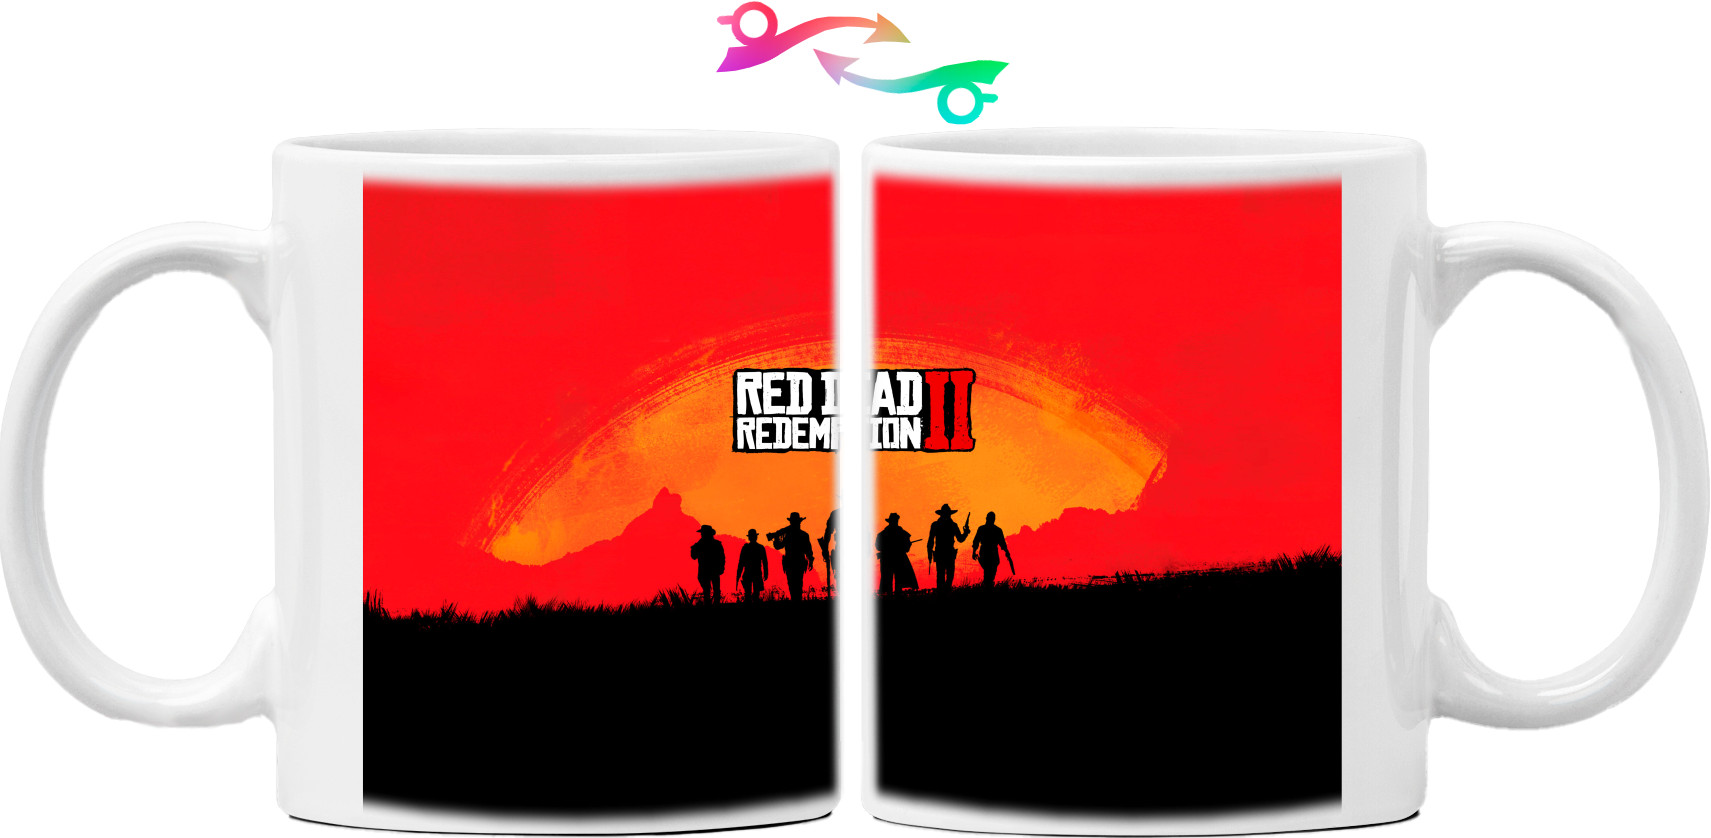 Red Dead Redemption 2 (1)